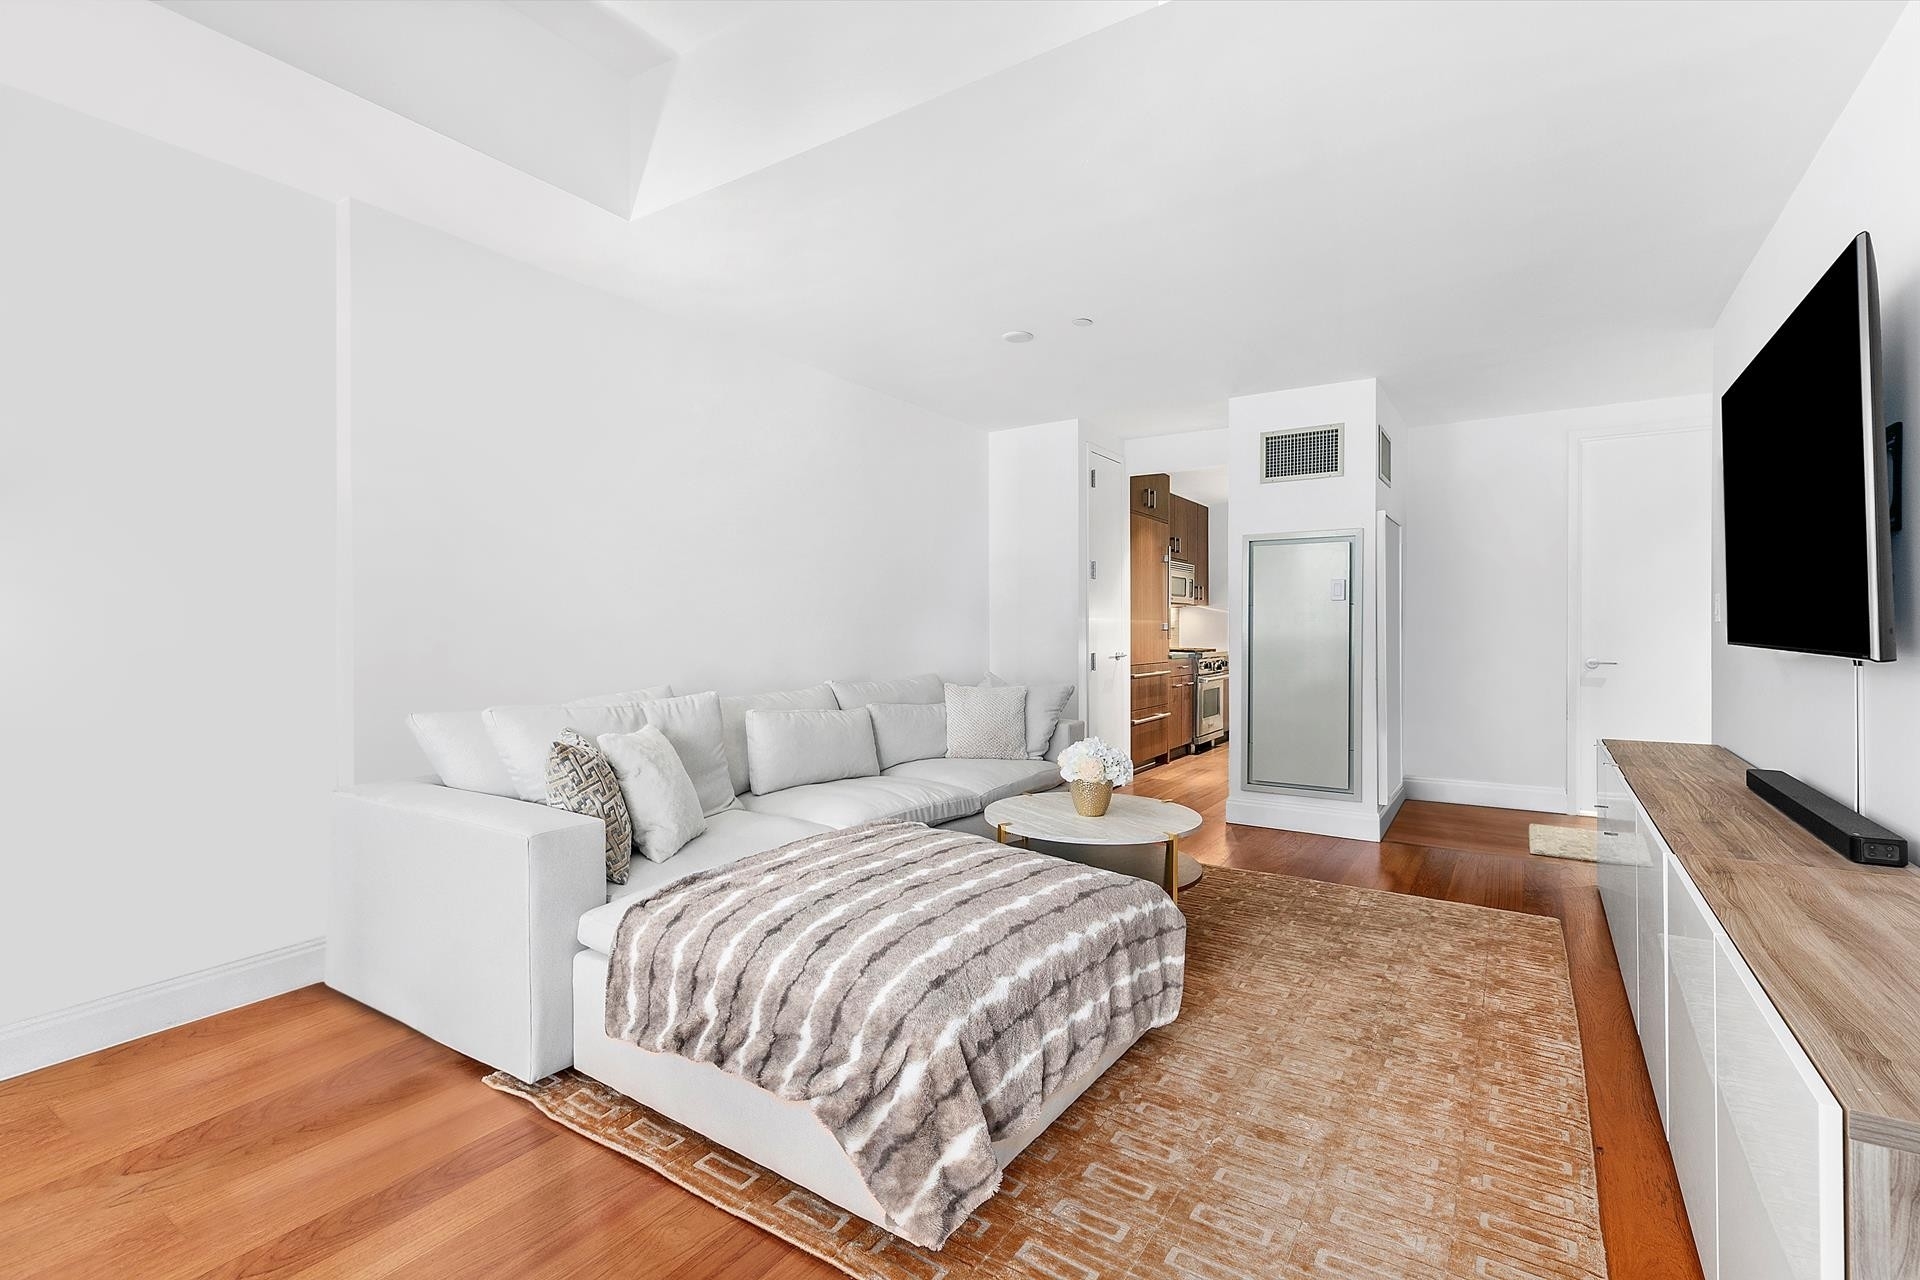 Condominium for Sale at The Centurion, 33 W 56TH ST, 8A Midtown West, New York, NY 10019